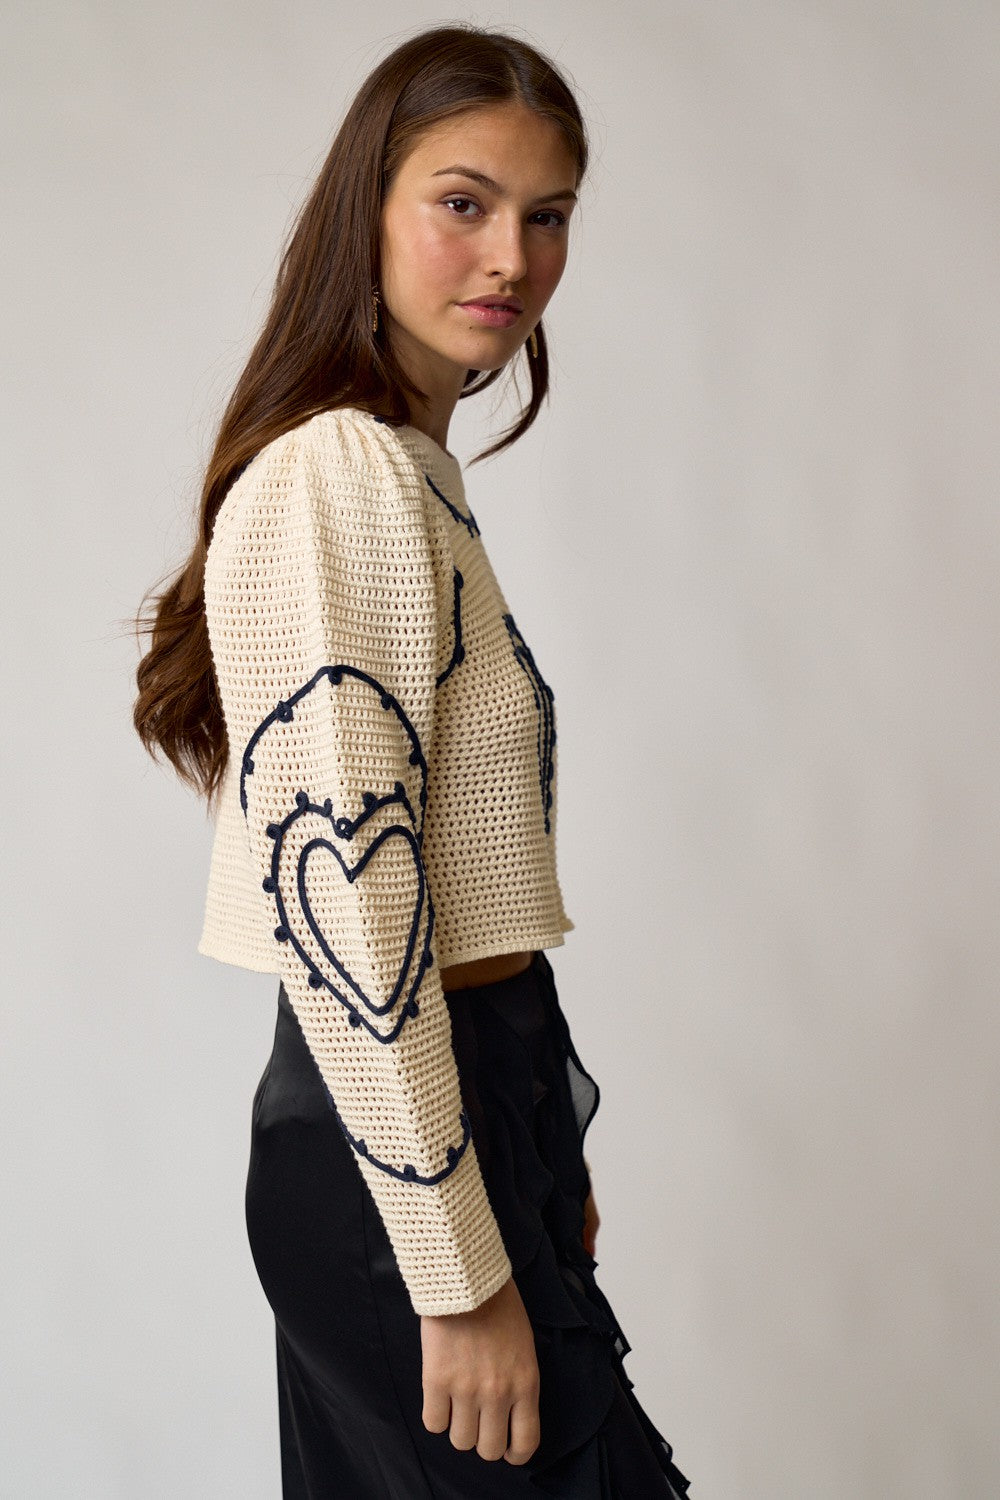 Embroidery Cropped Sweater